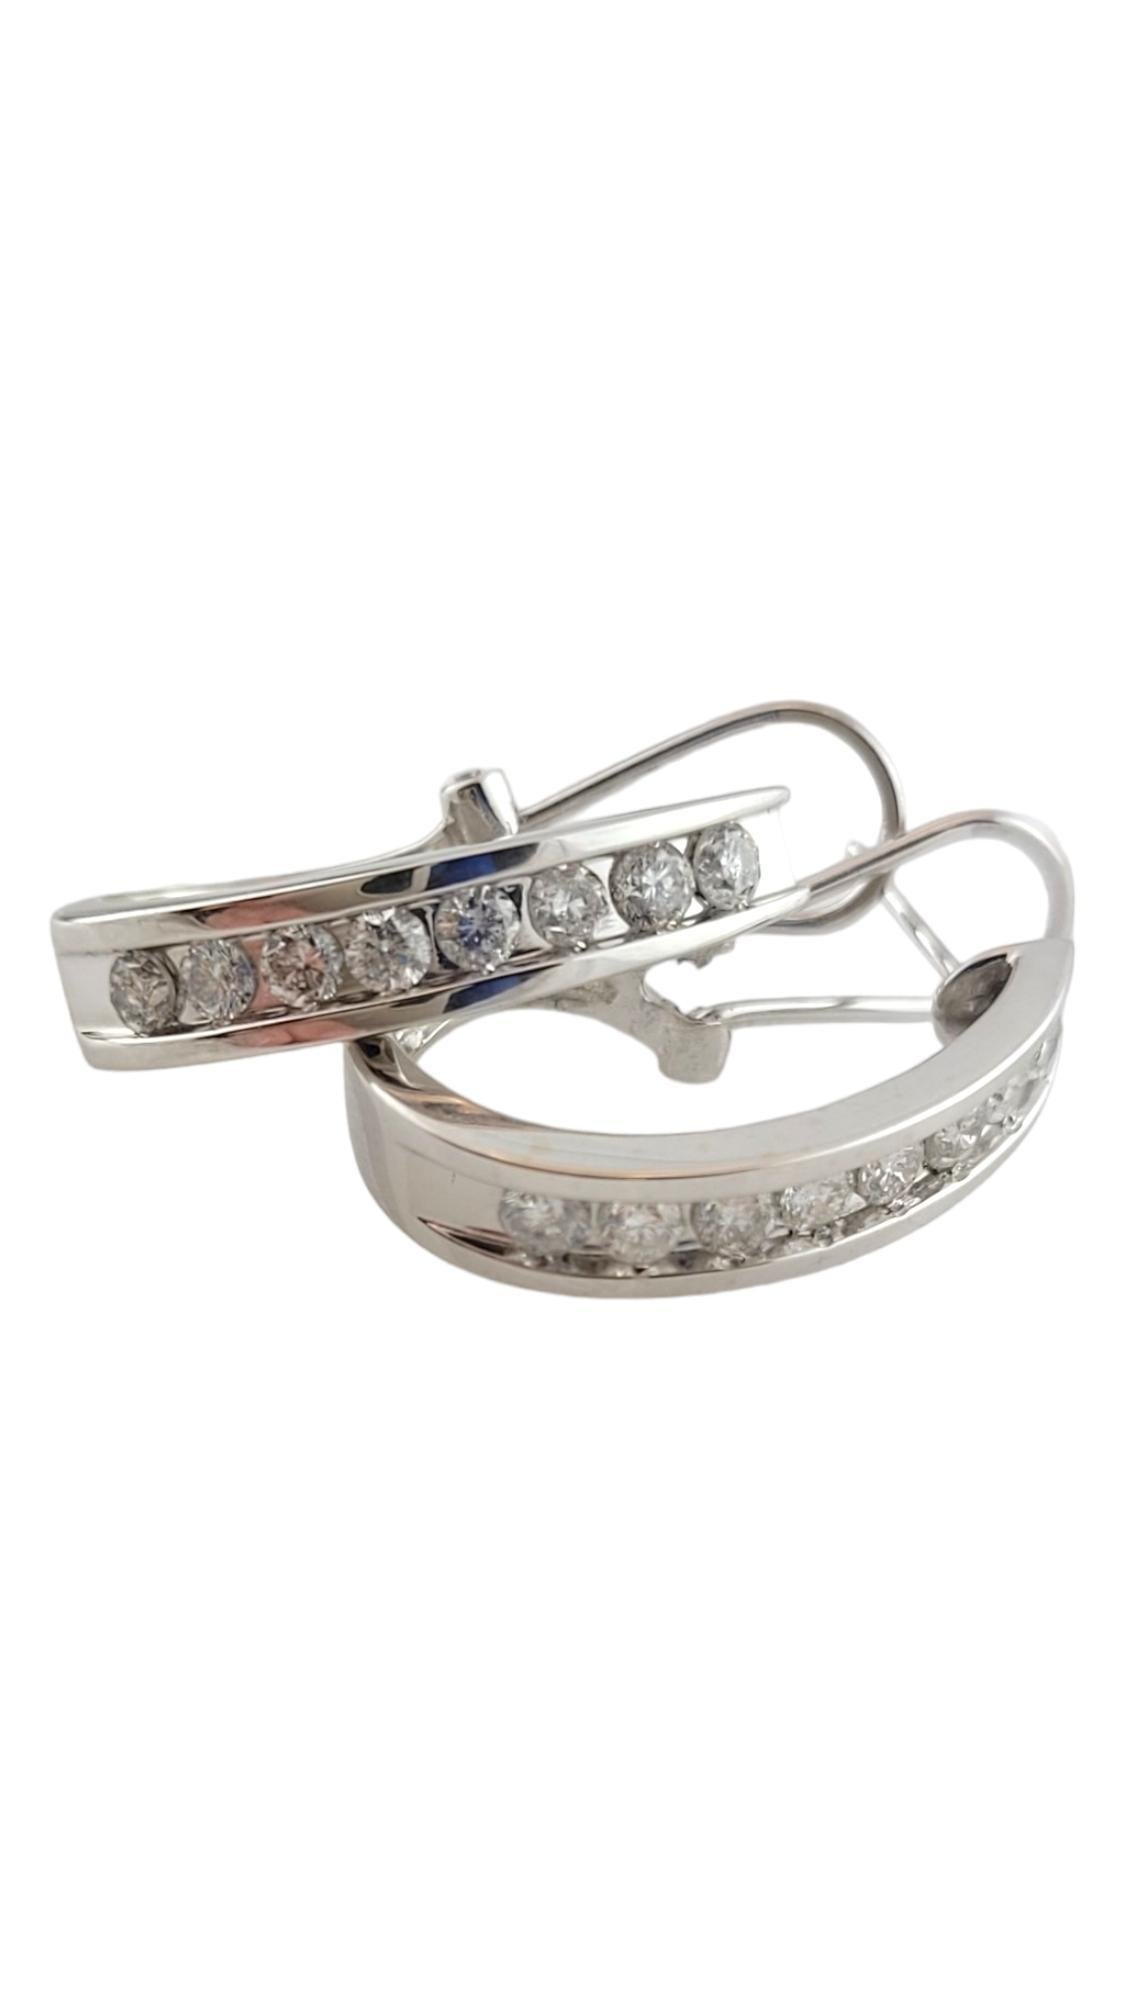 14K White Gold Diamond Hoop Earrings #16253 In Good Condition For Sale In Washington Depot, CT